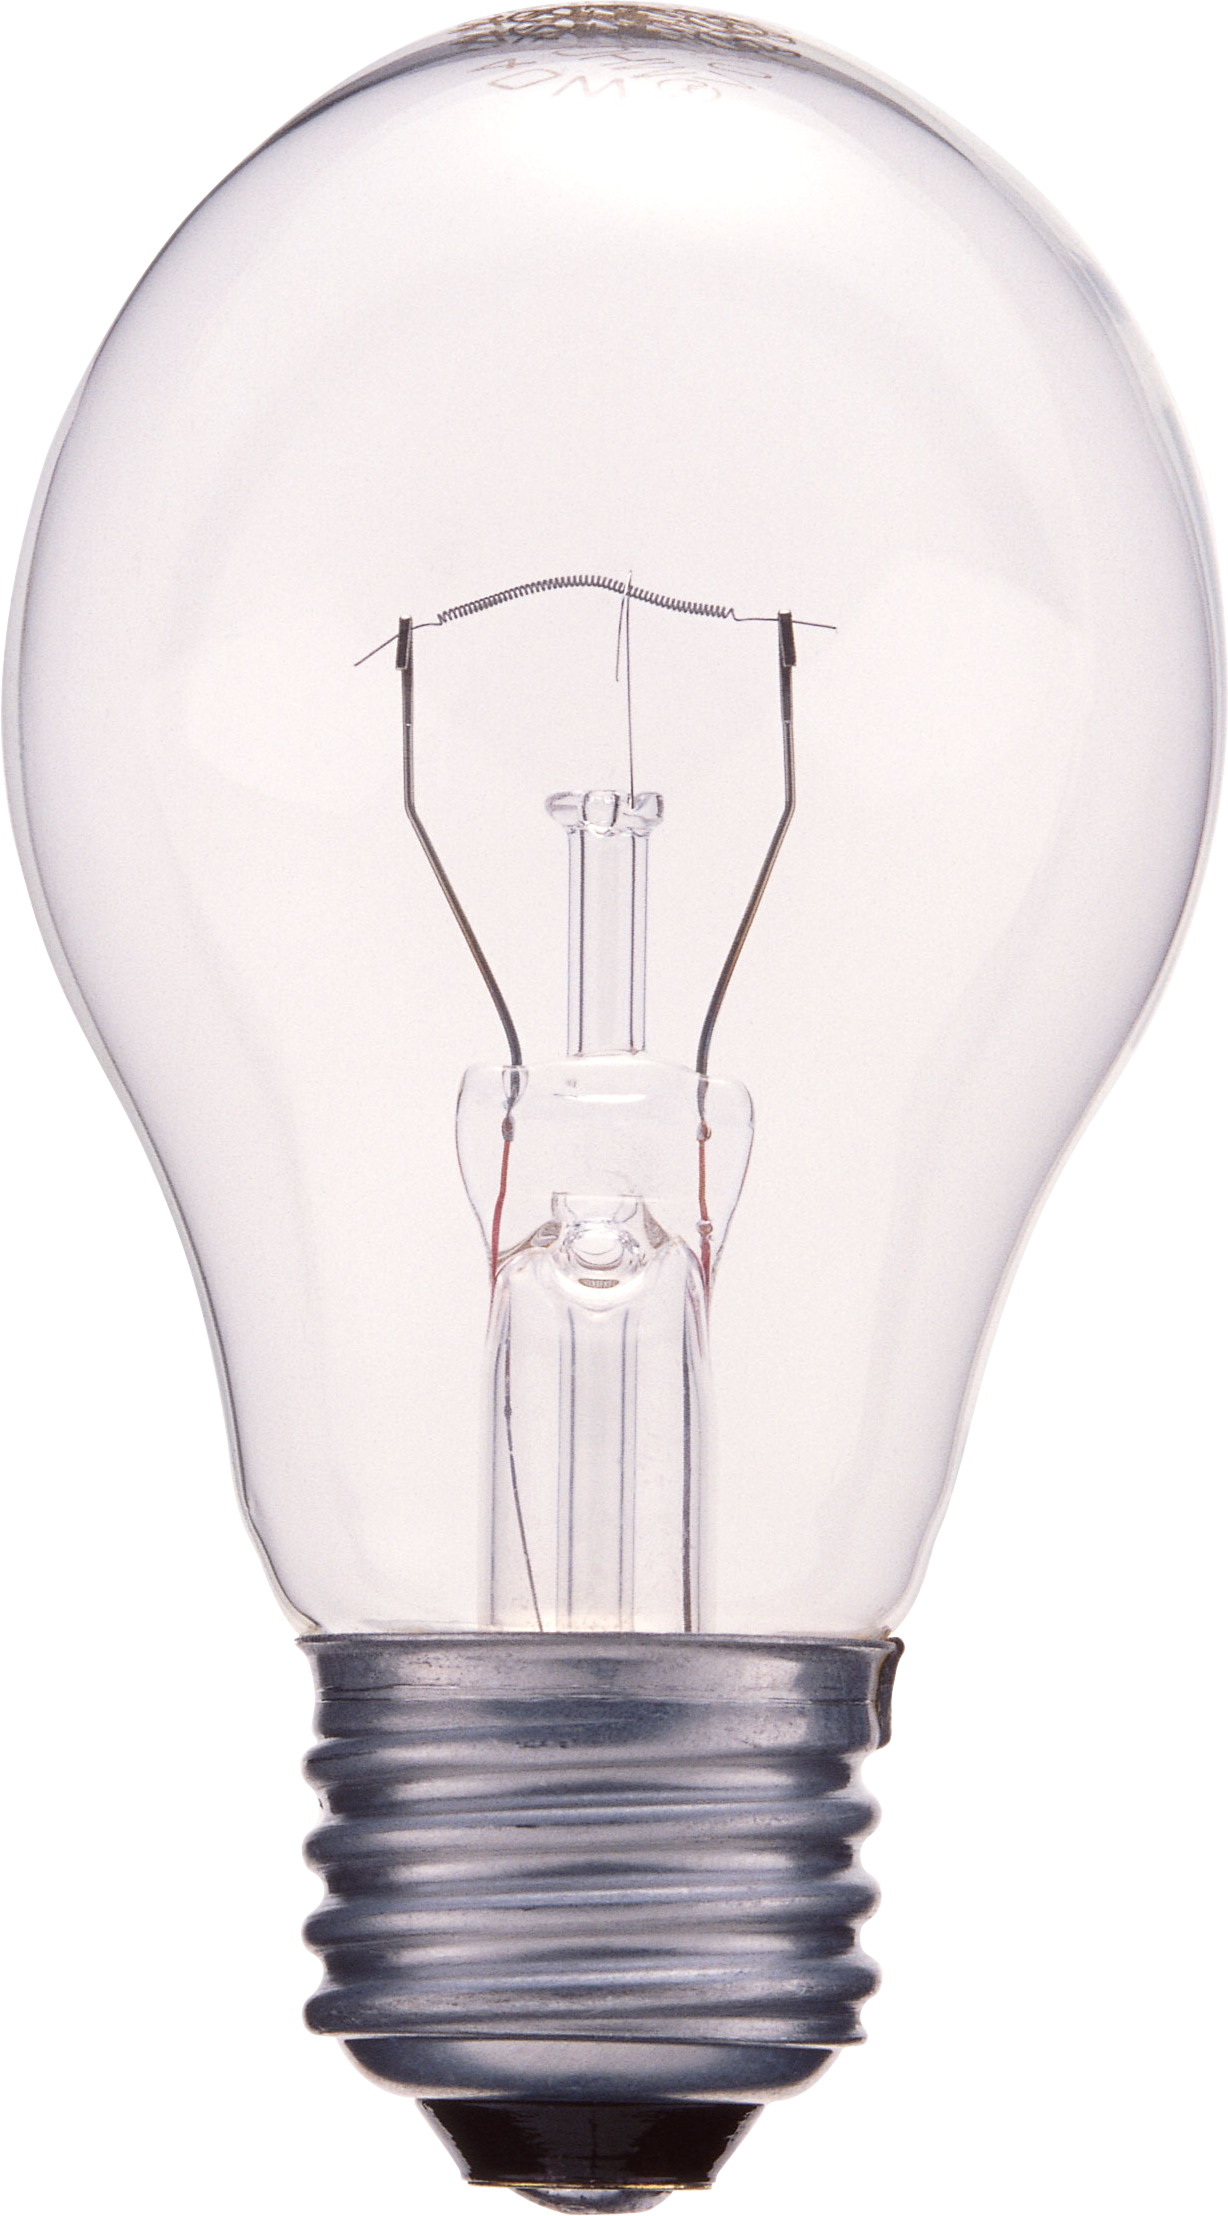 electric clipart bulb